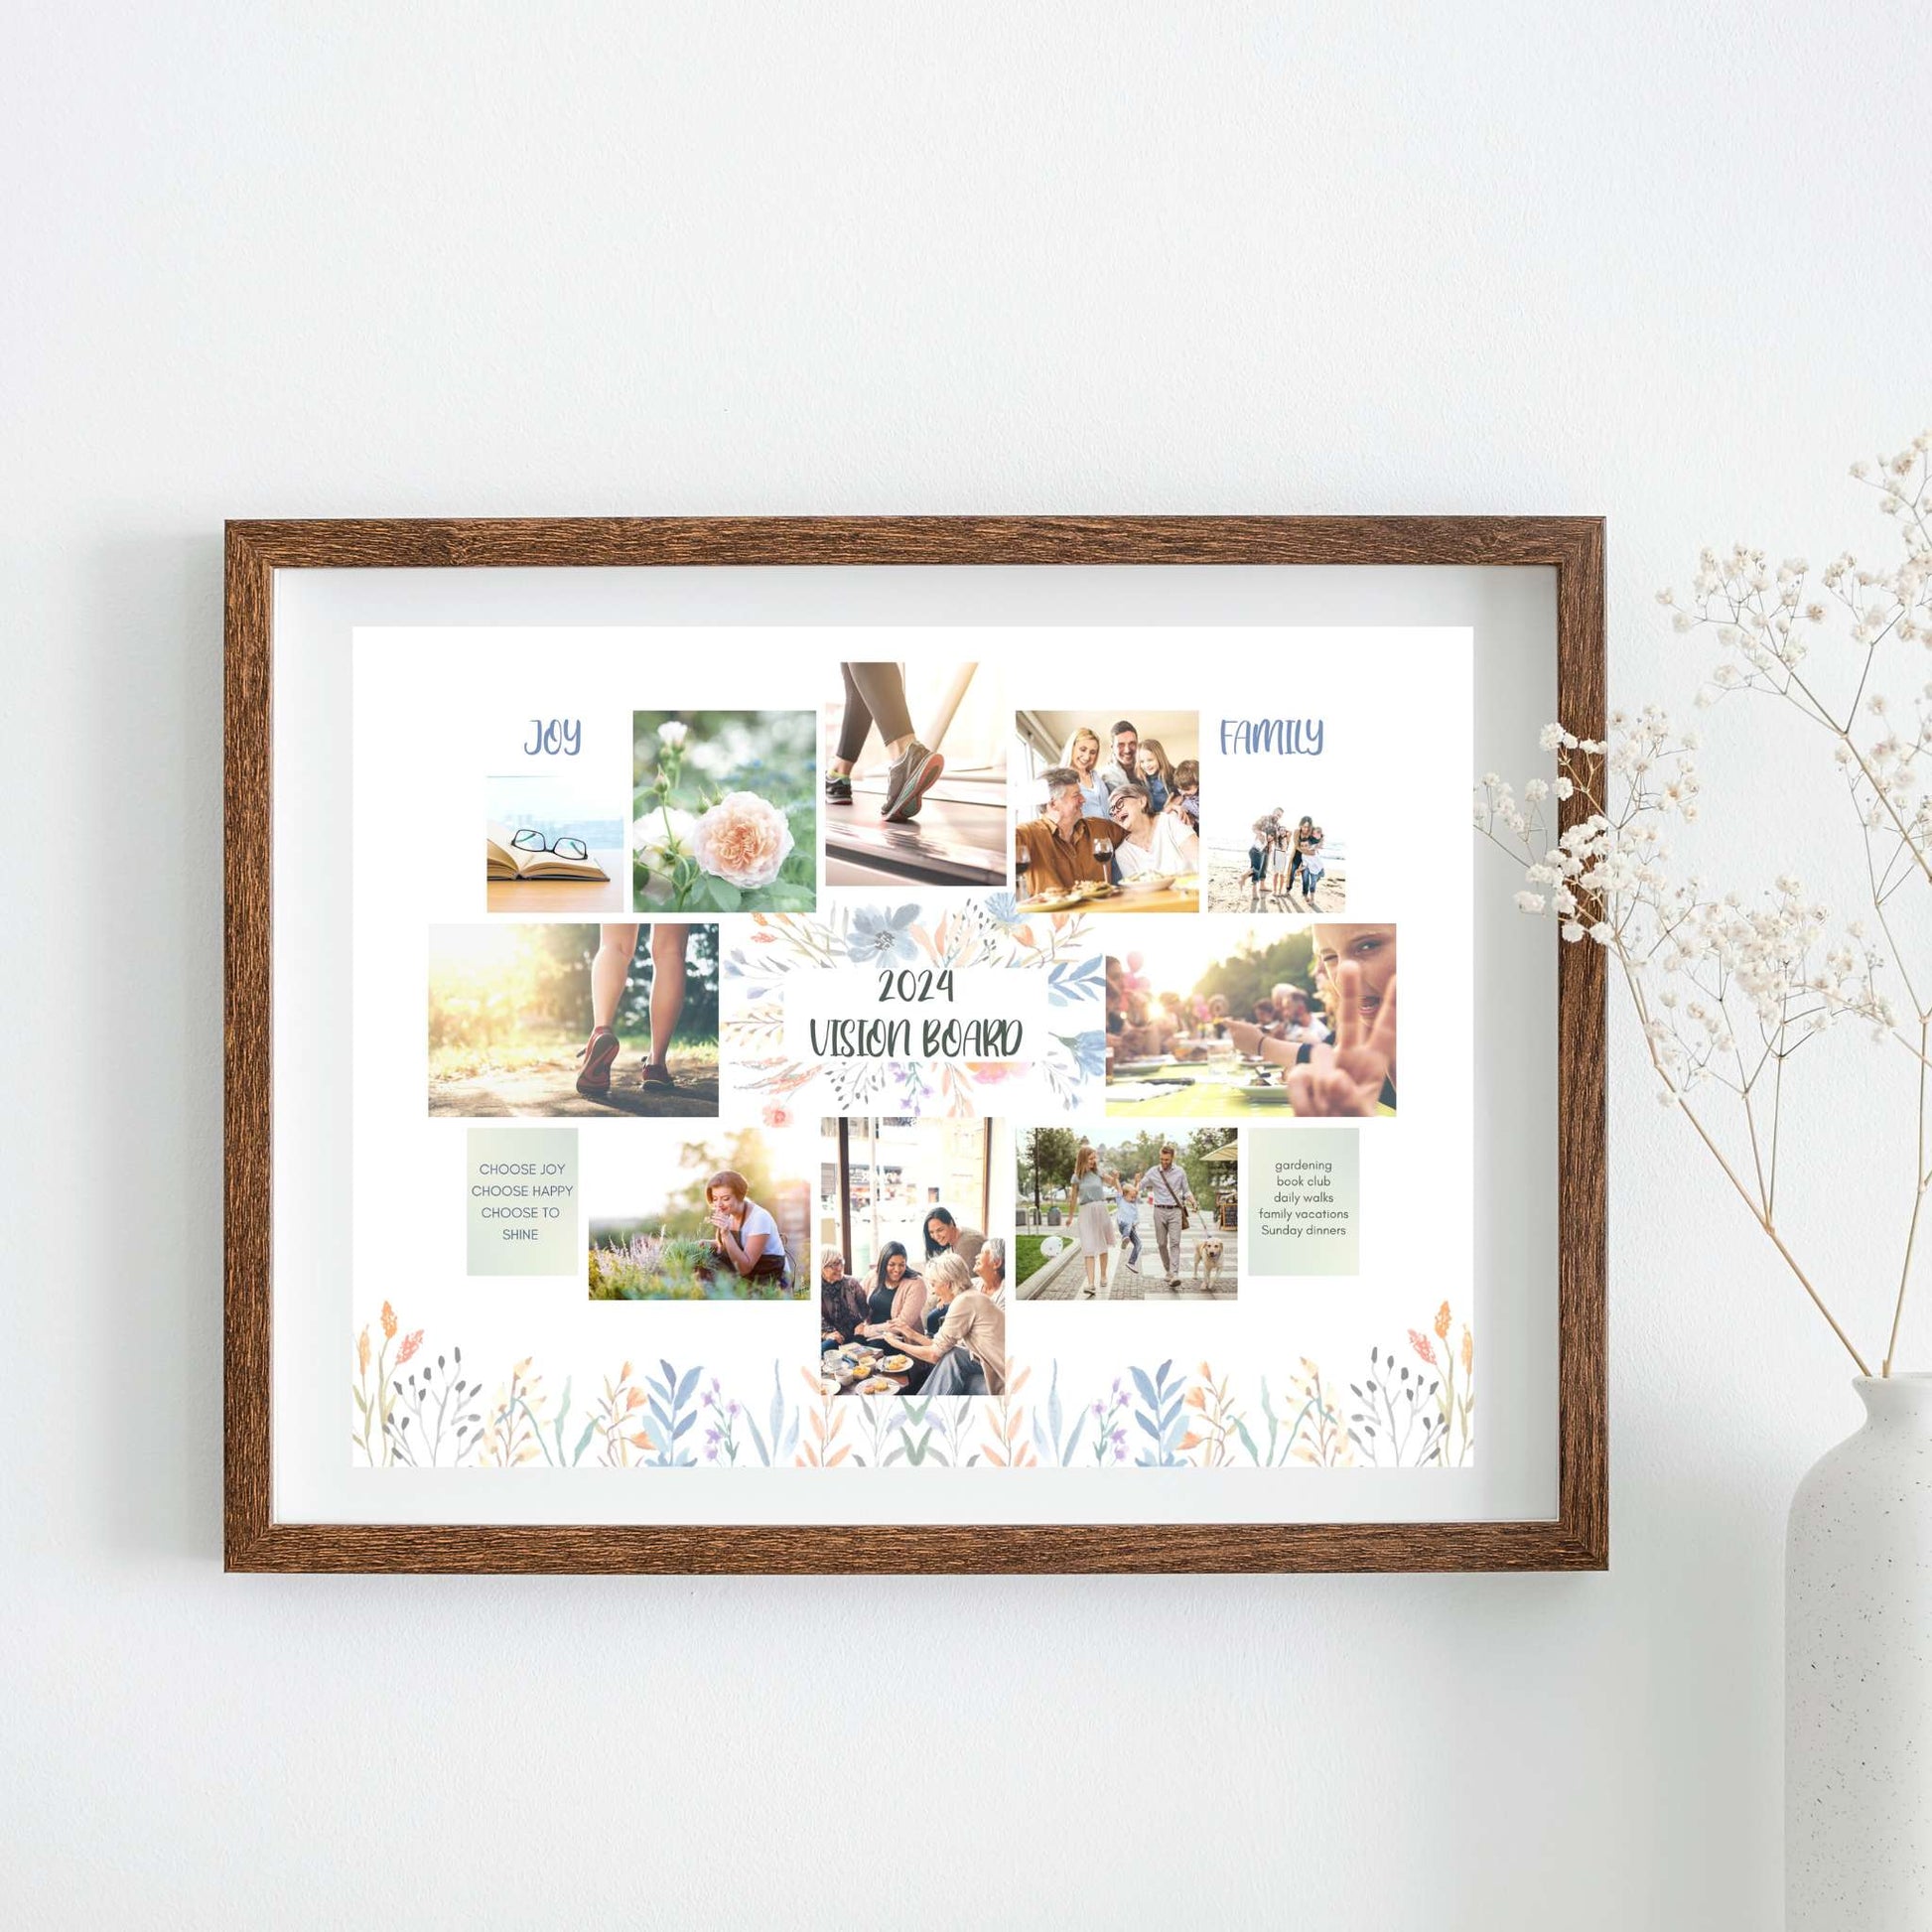 Floral vision board design in frame hanging on wall